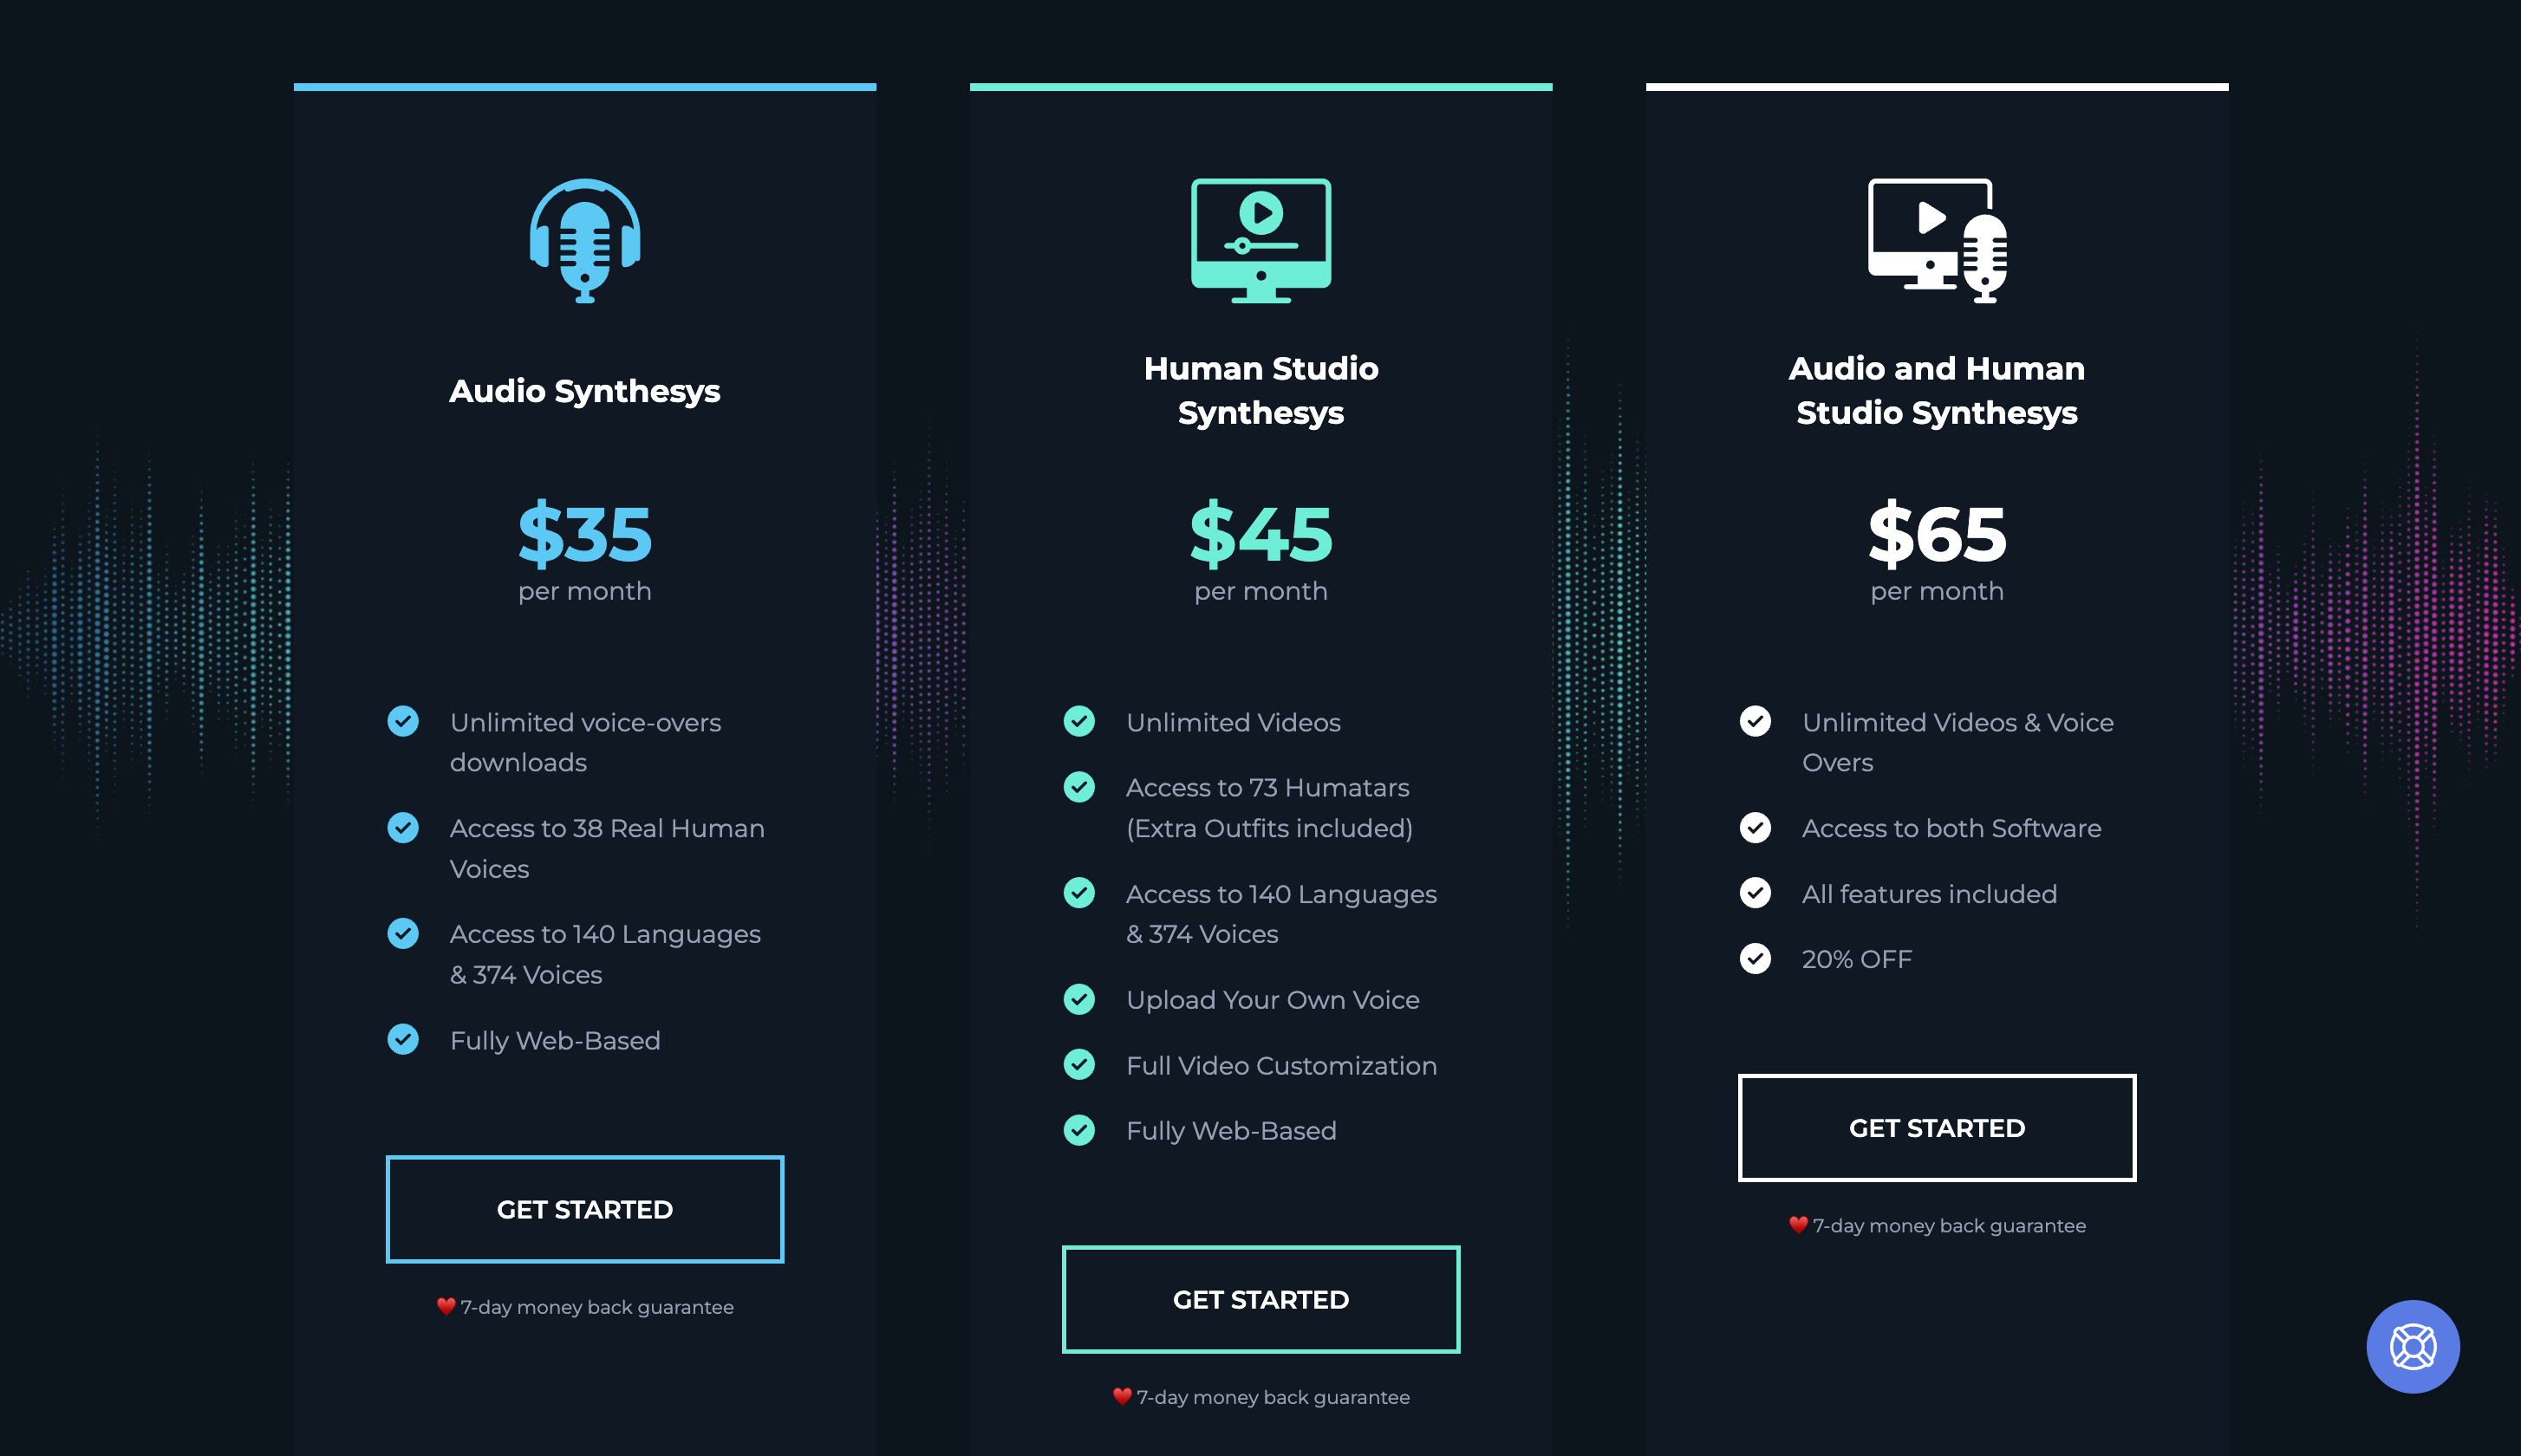 Synthesys Pricing